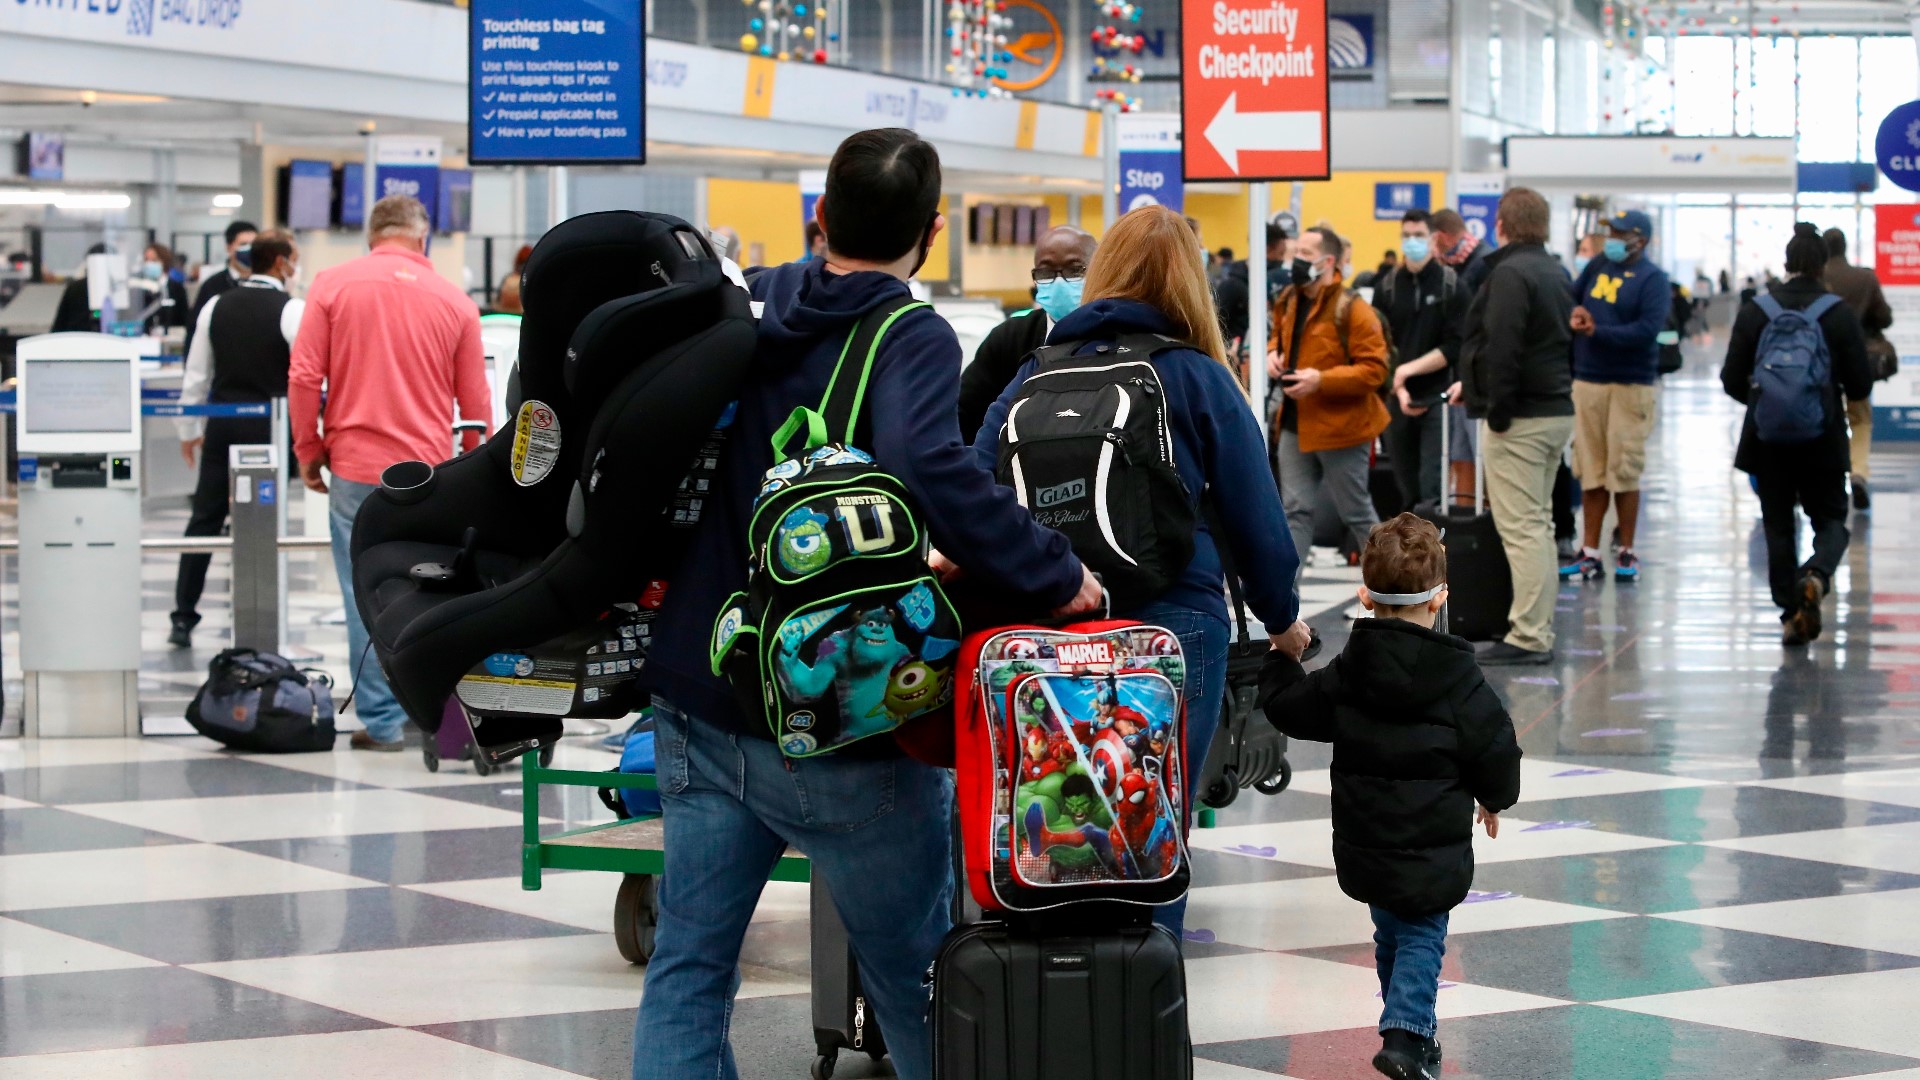 More than 3 million people were screened at U.S. airports this weekend ahead of Thanksgiving, according to the TSA.